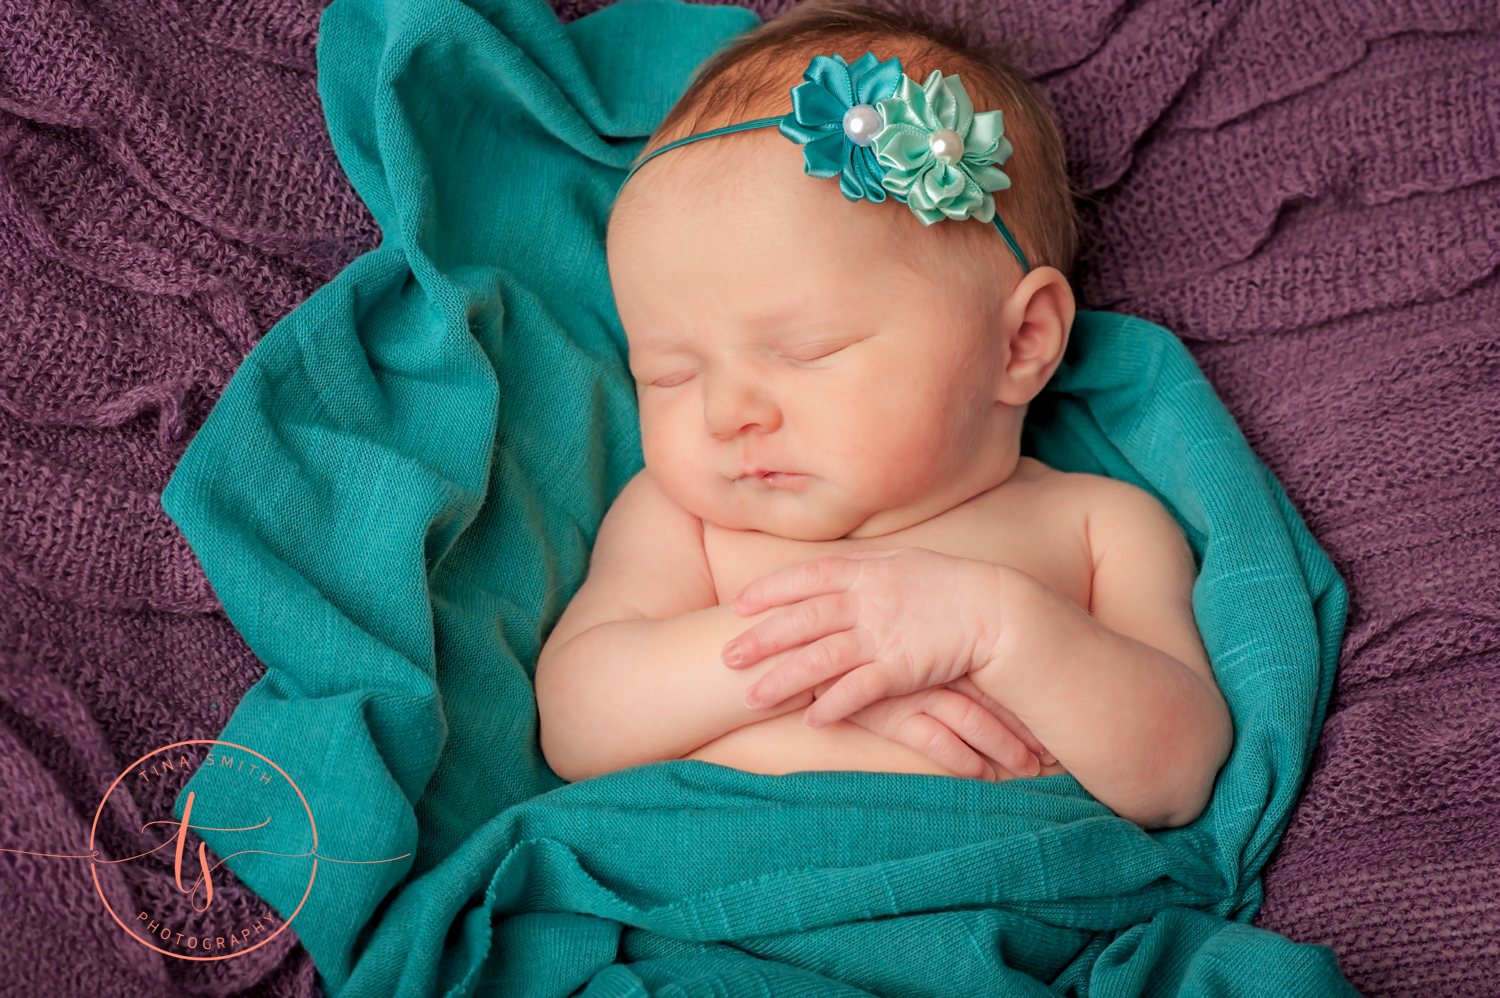 newborn baby wrapped in teal on purple blanket